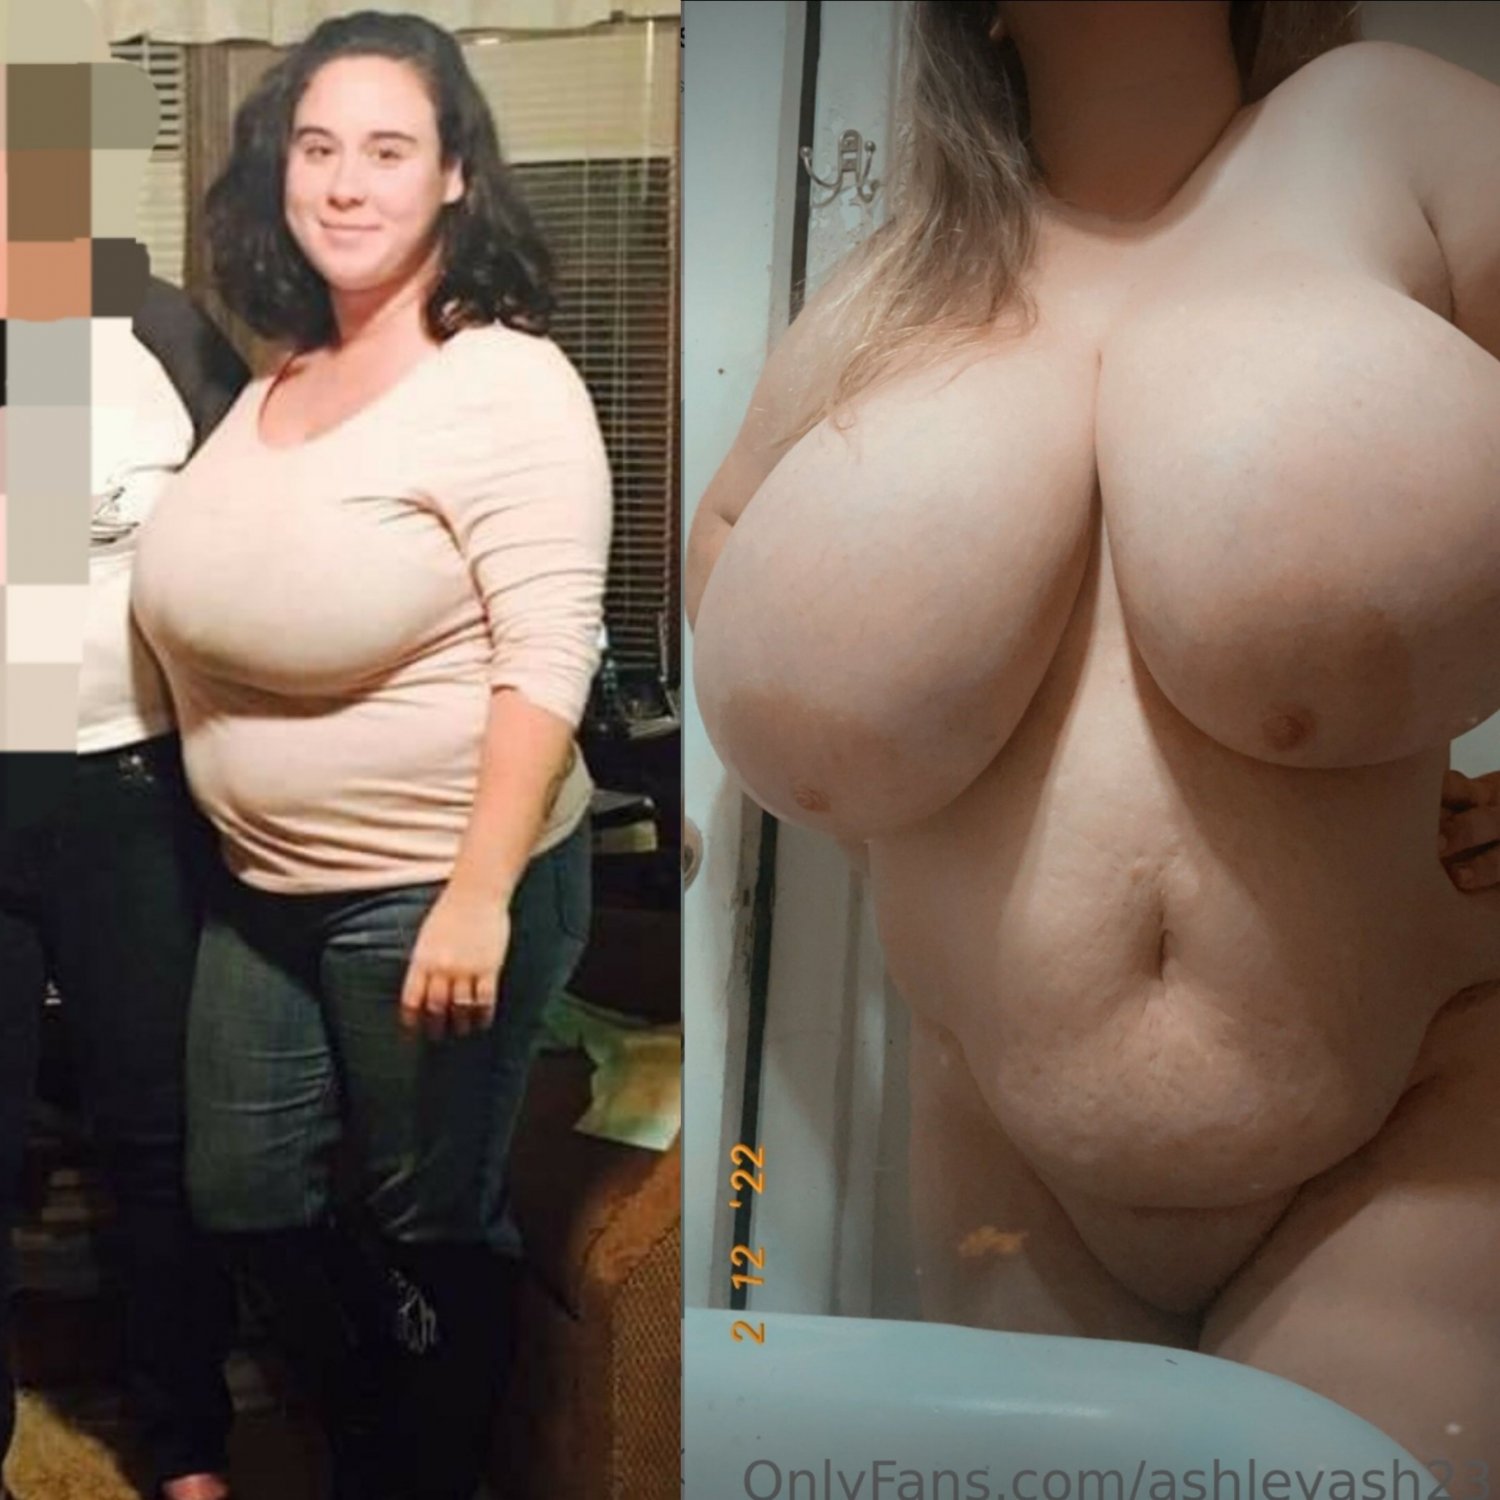 Twin Bbw Porn - Busty Twins UPDATE: Nudes Of Both! - Porn - EroMe